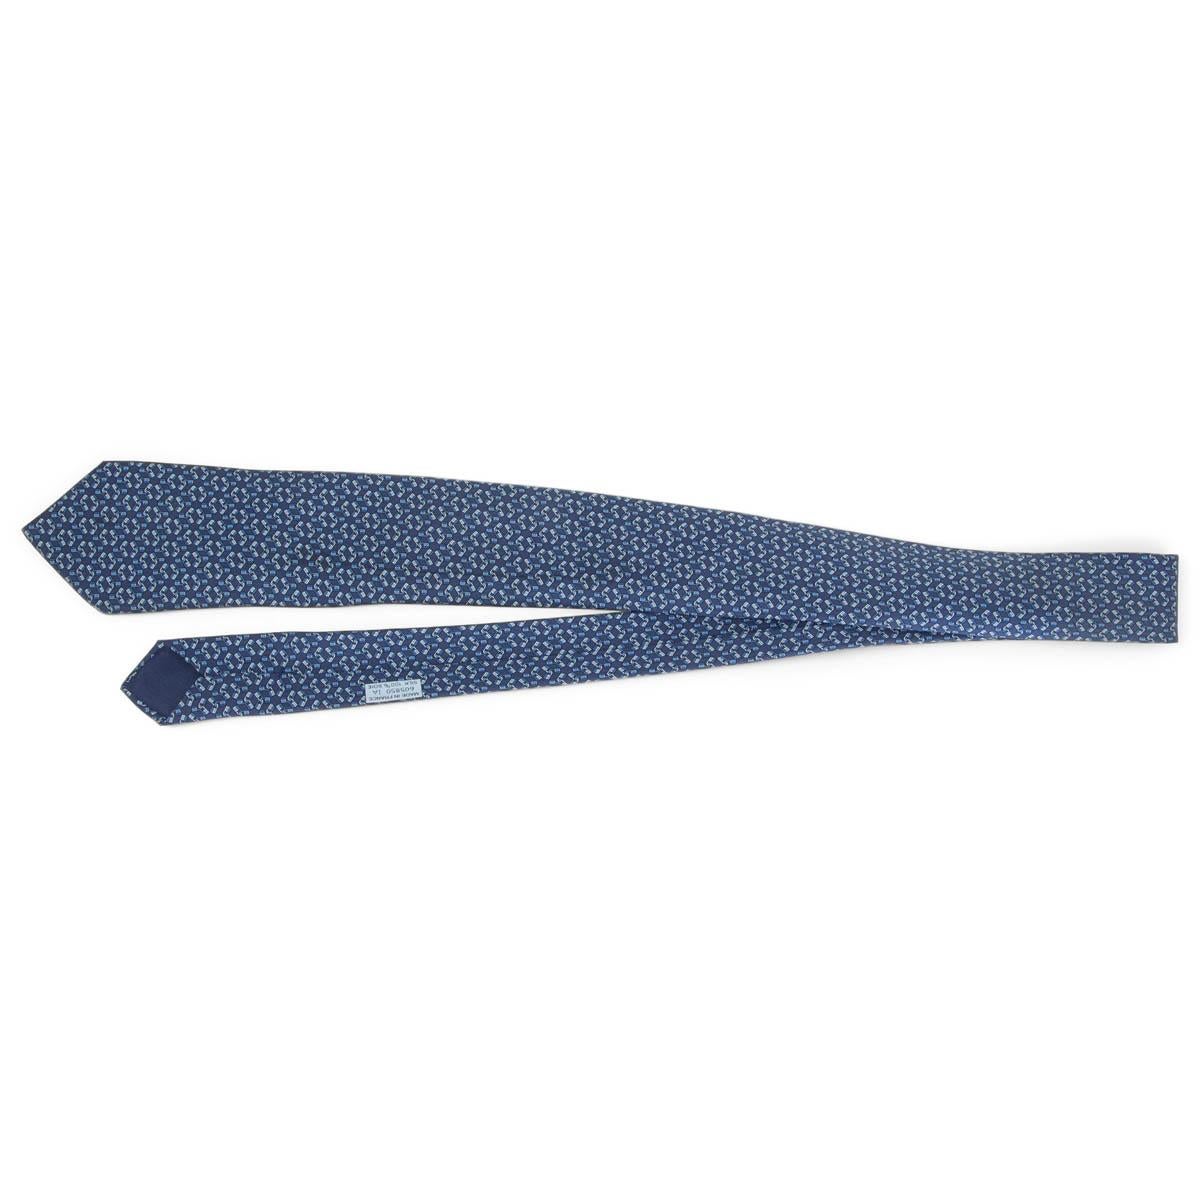 100% authentic Hermès navy blue tie designed in silk (100%) with 'Lock'H' detail throughout. Has been worn and is in excellent condition. No Box.

Measurements
Width	8cm (3.1in)
Length	150cm (58.5in)

All our listings include only the listed item